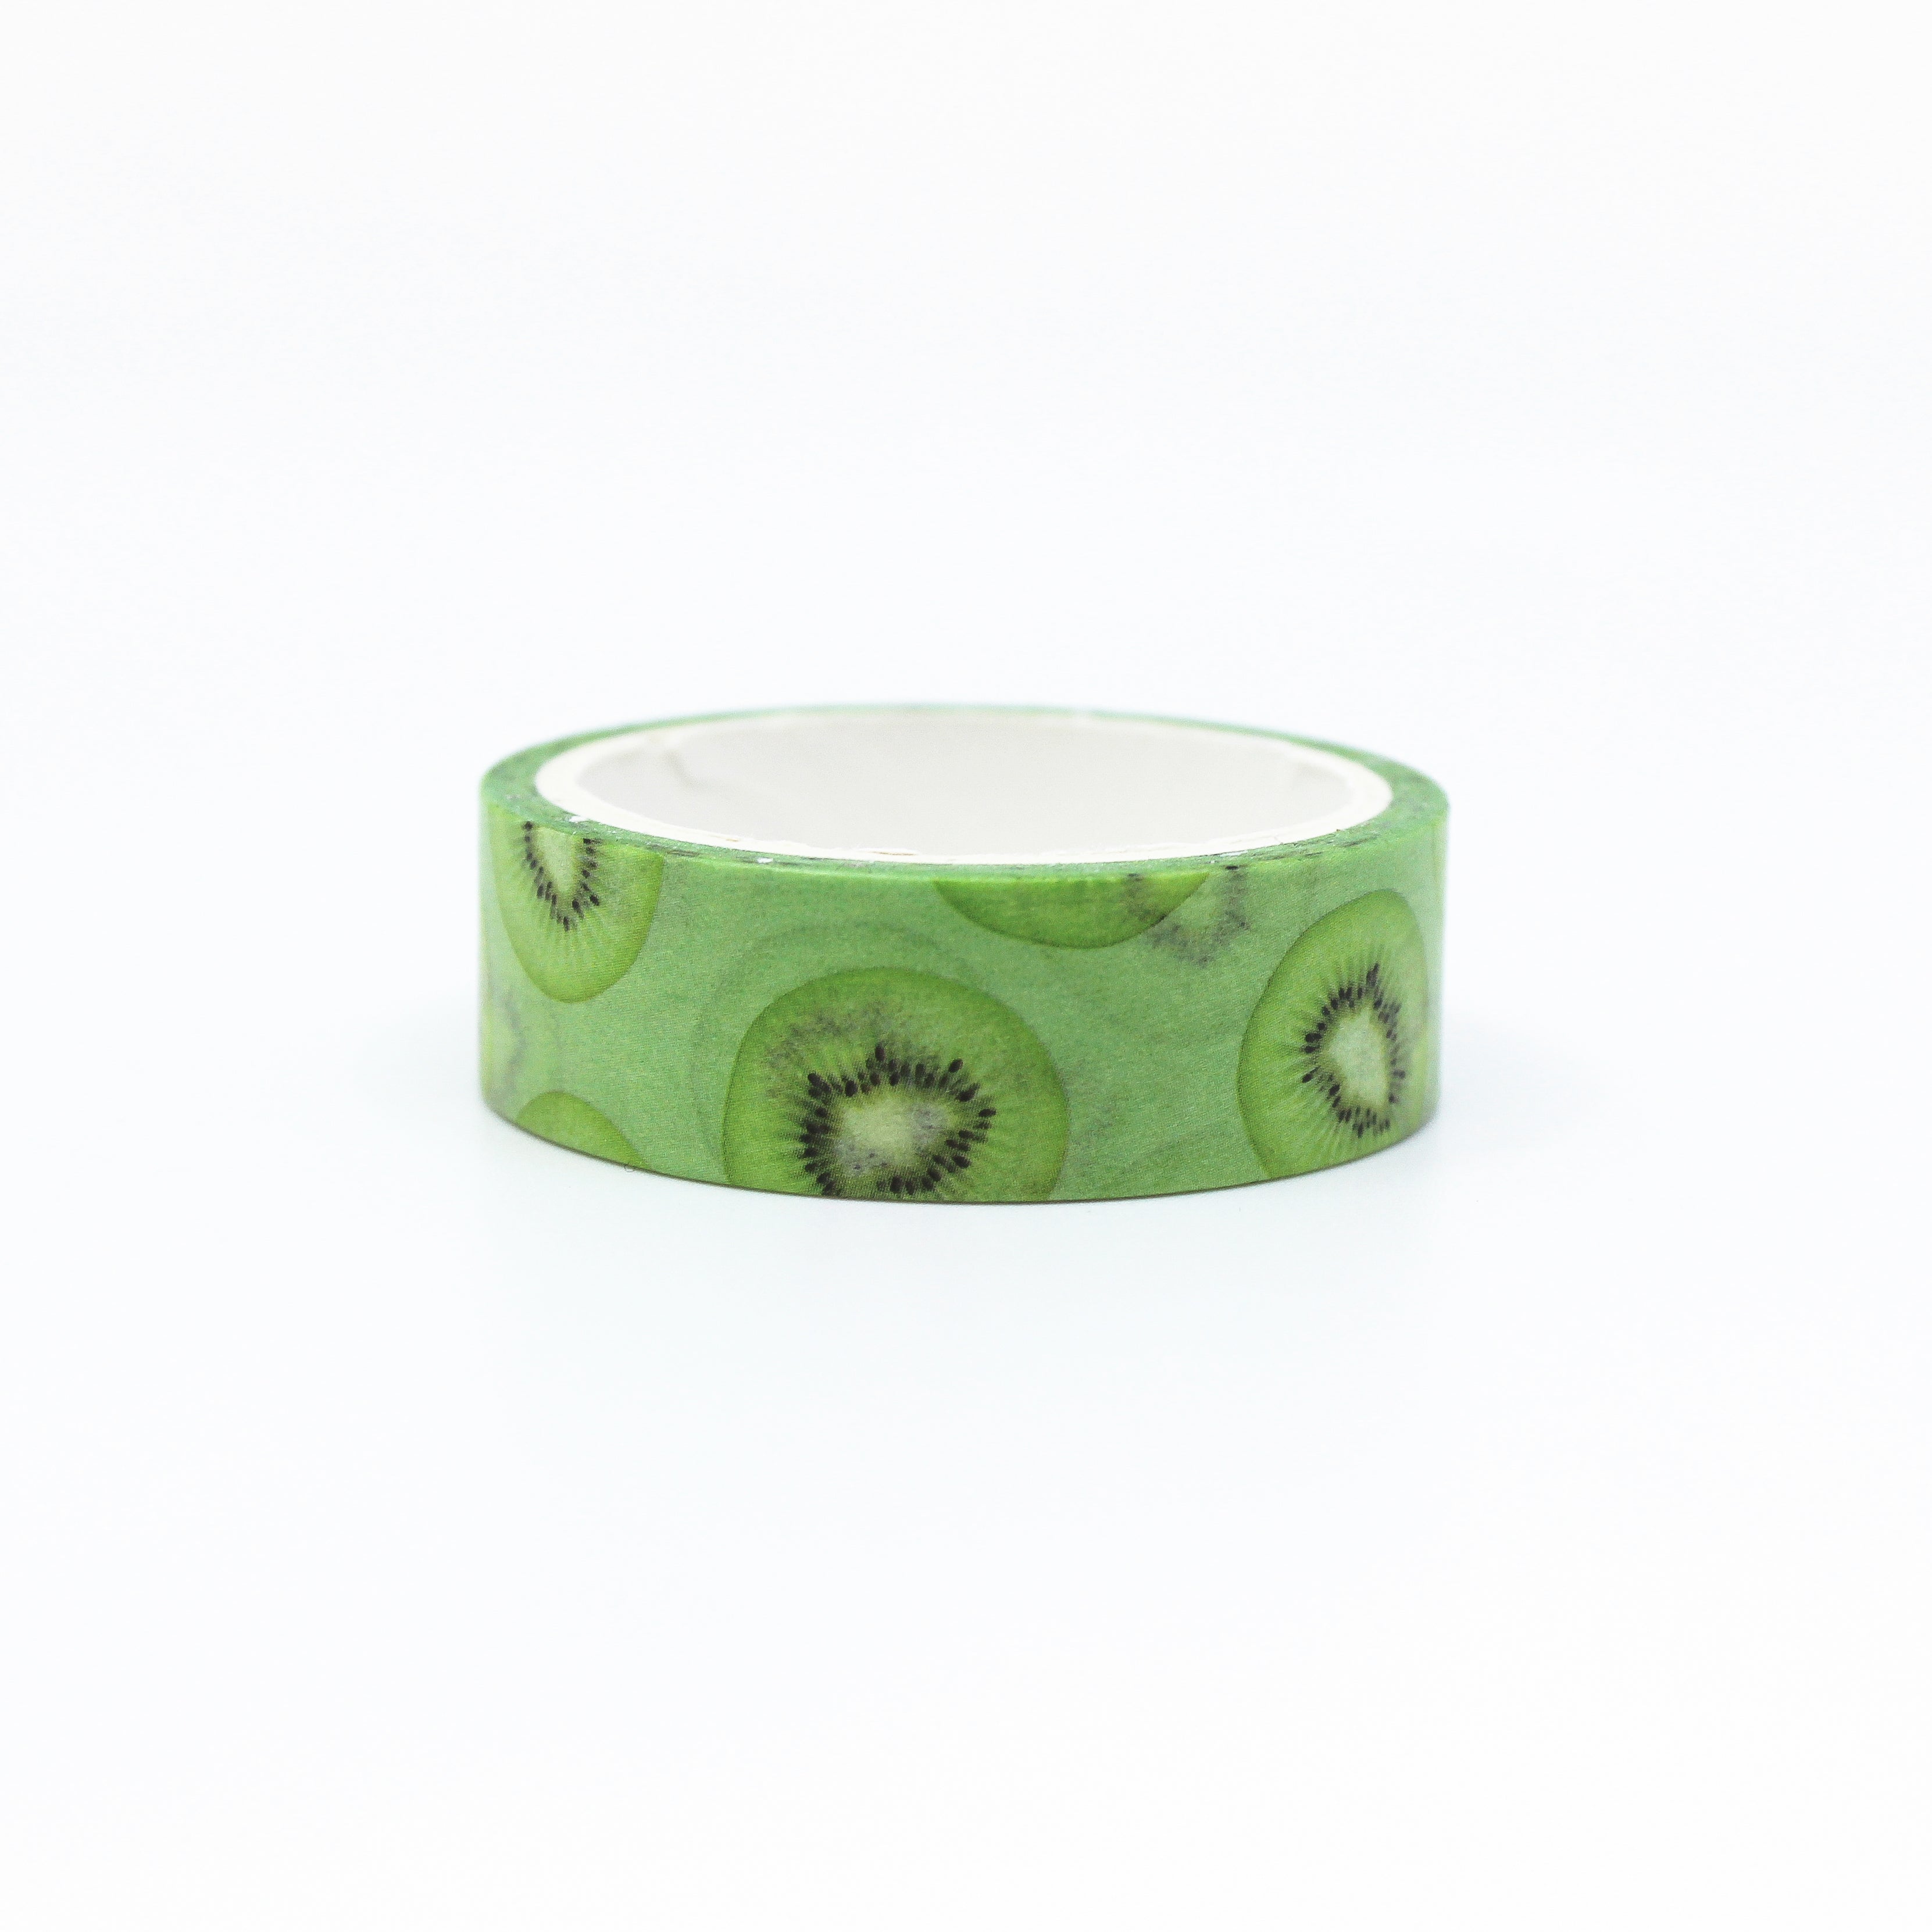 This is a cute kiwi tropical fruits washi tape from BBB Supplies Craft Shop